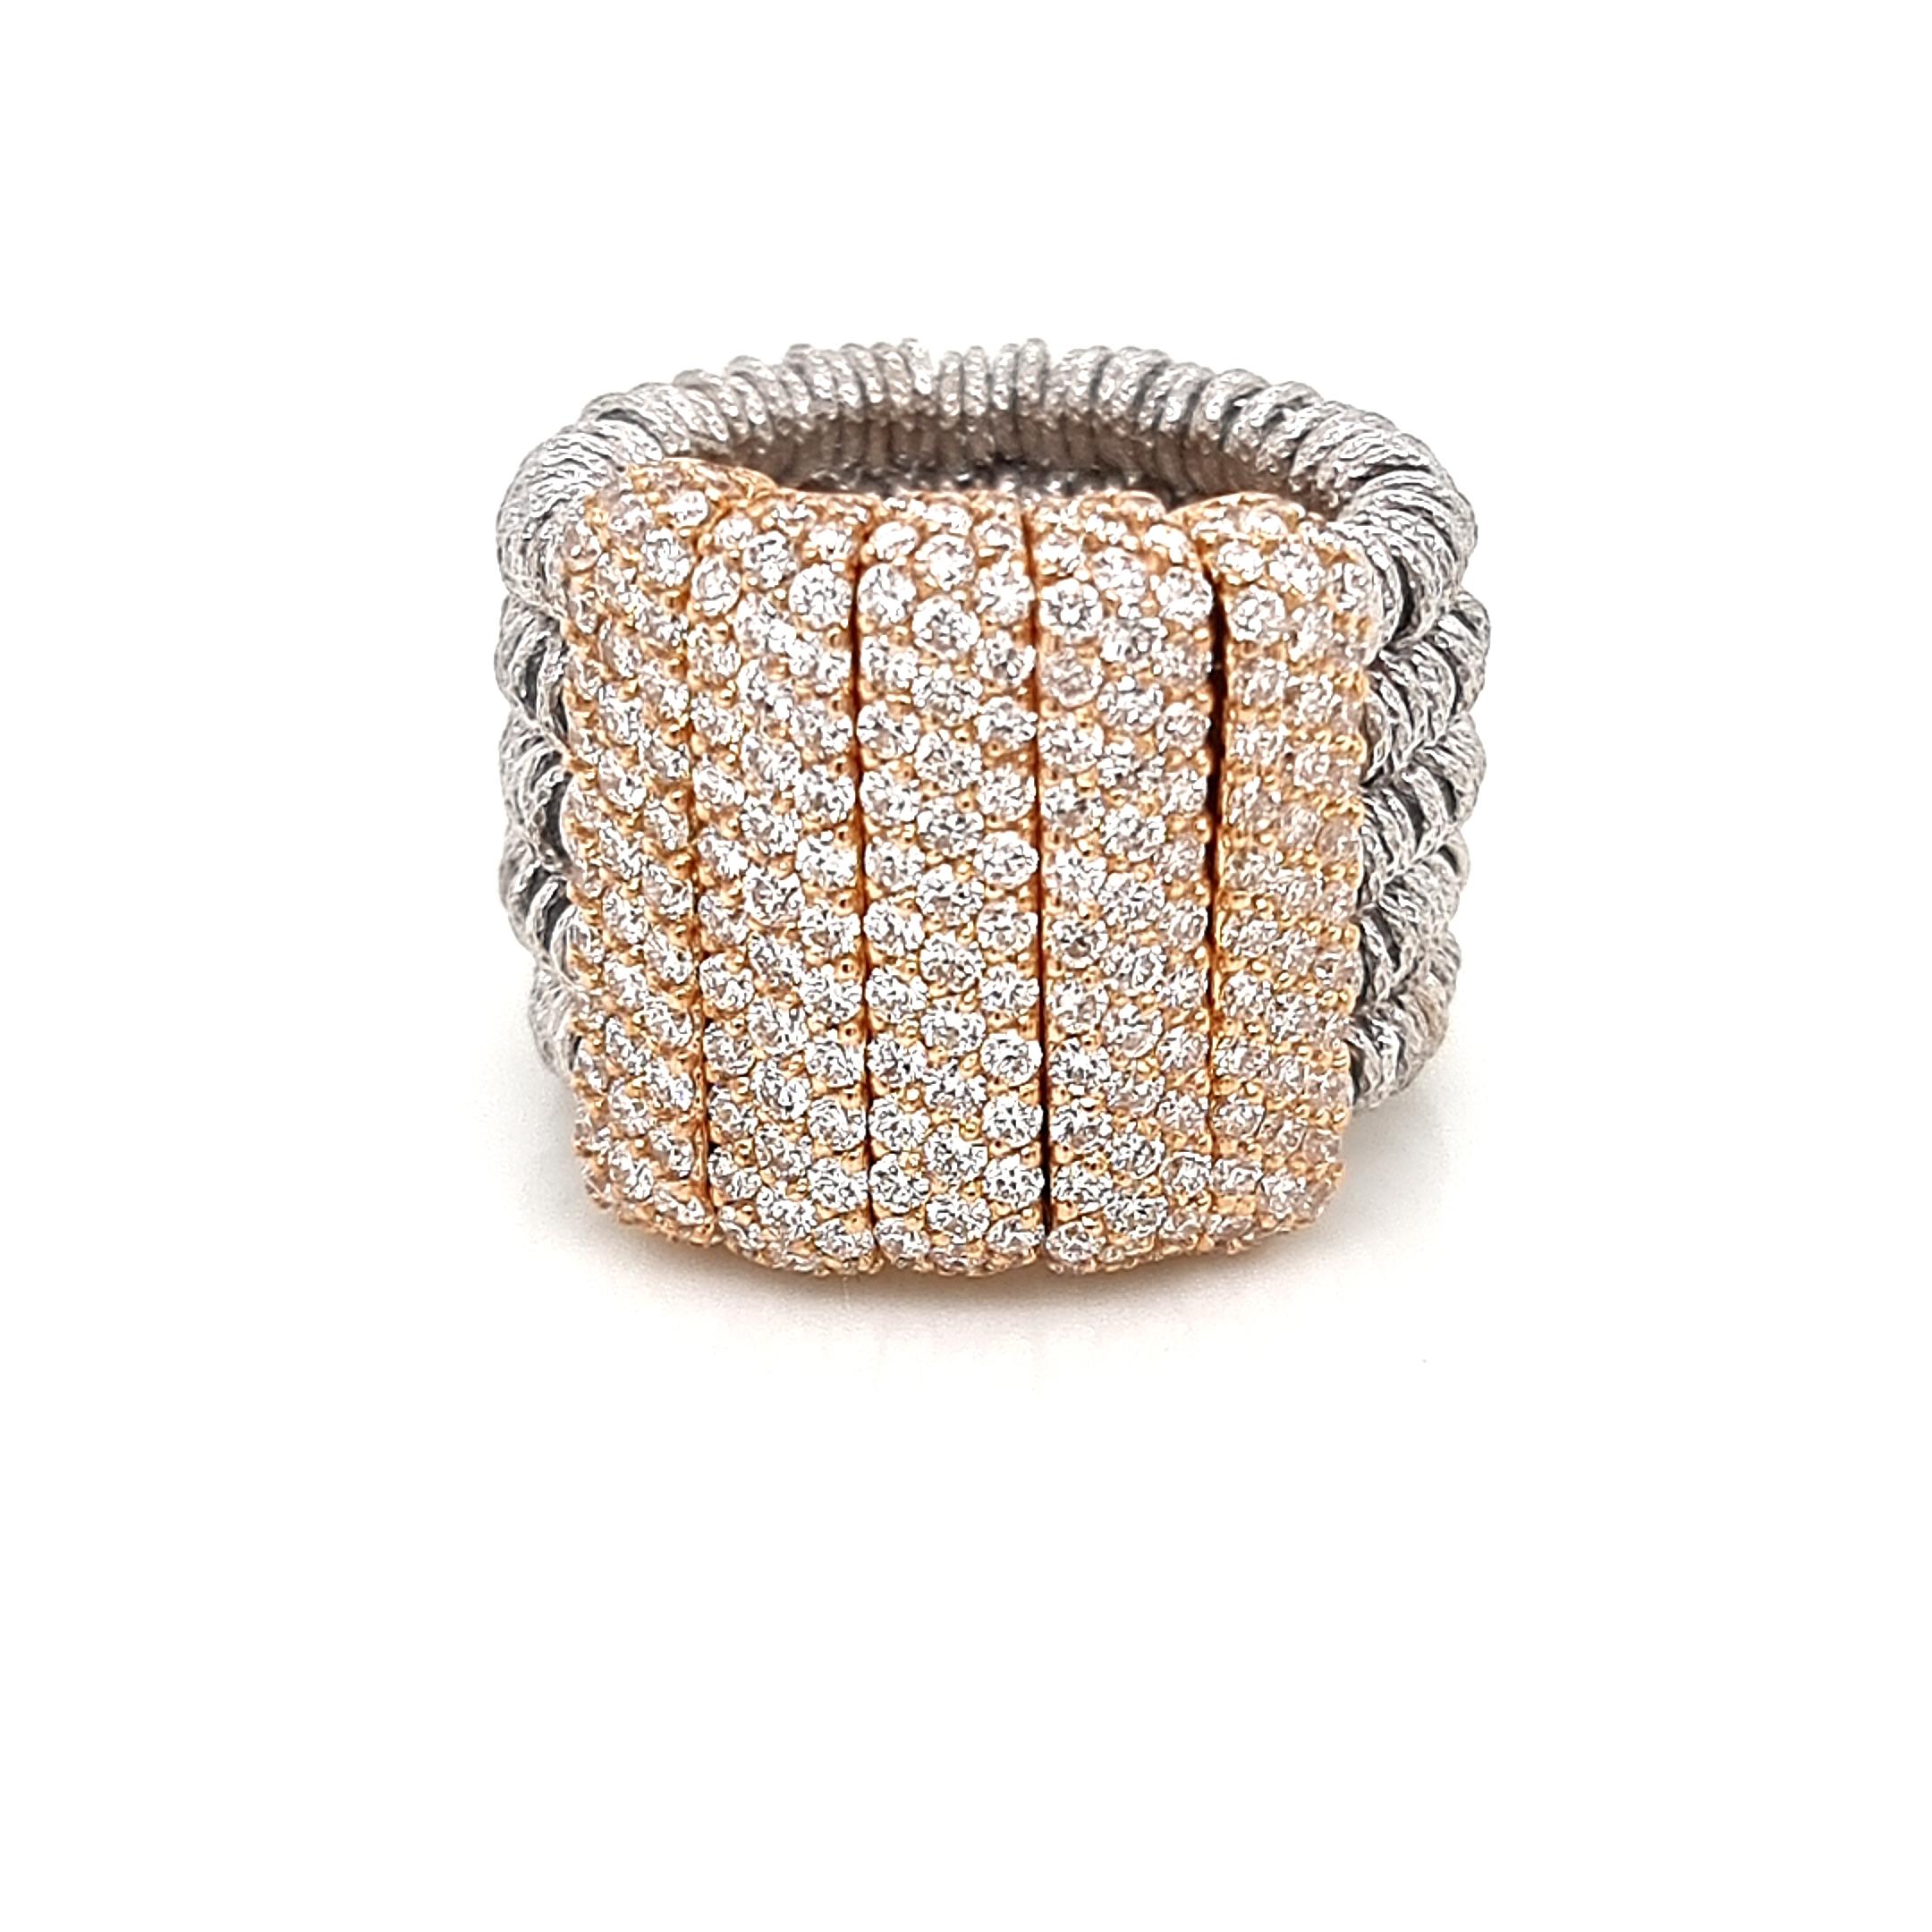 Discover the innovative craftsmanship of Roberto Demeglio with this designer ring, a captivating blend of steel springs and 18K gold elements adorned with 2.74 carats of sparkling white diamonds. This stretchable ring not only showcases the finest